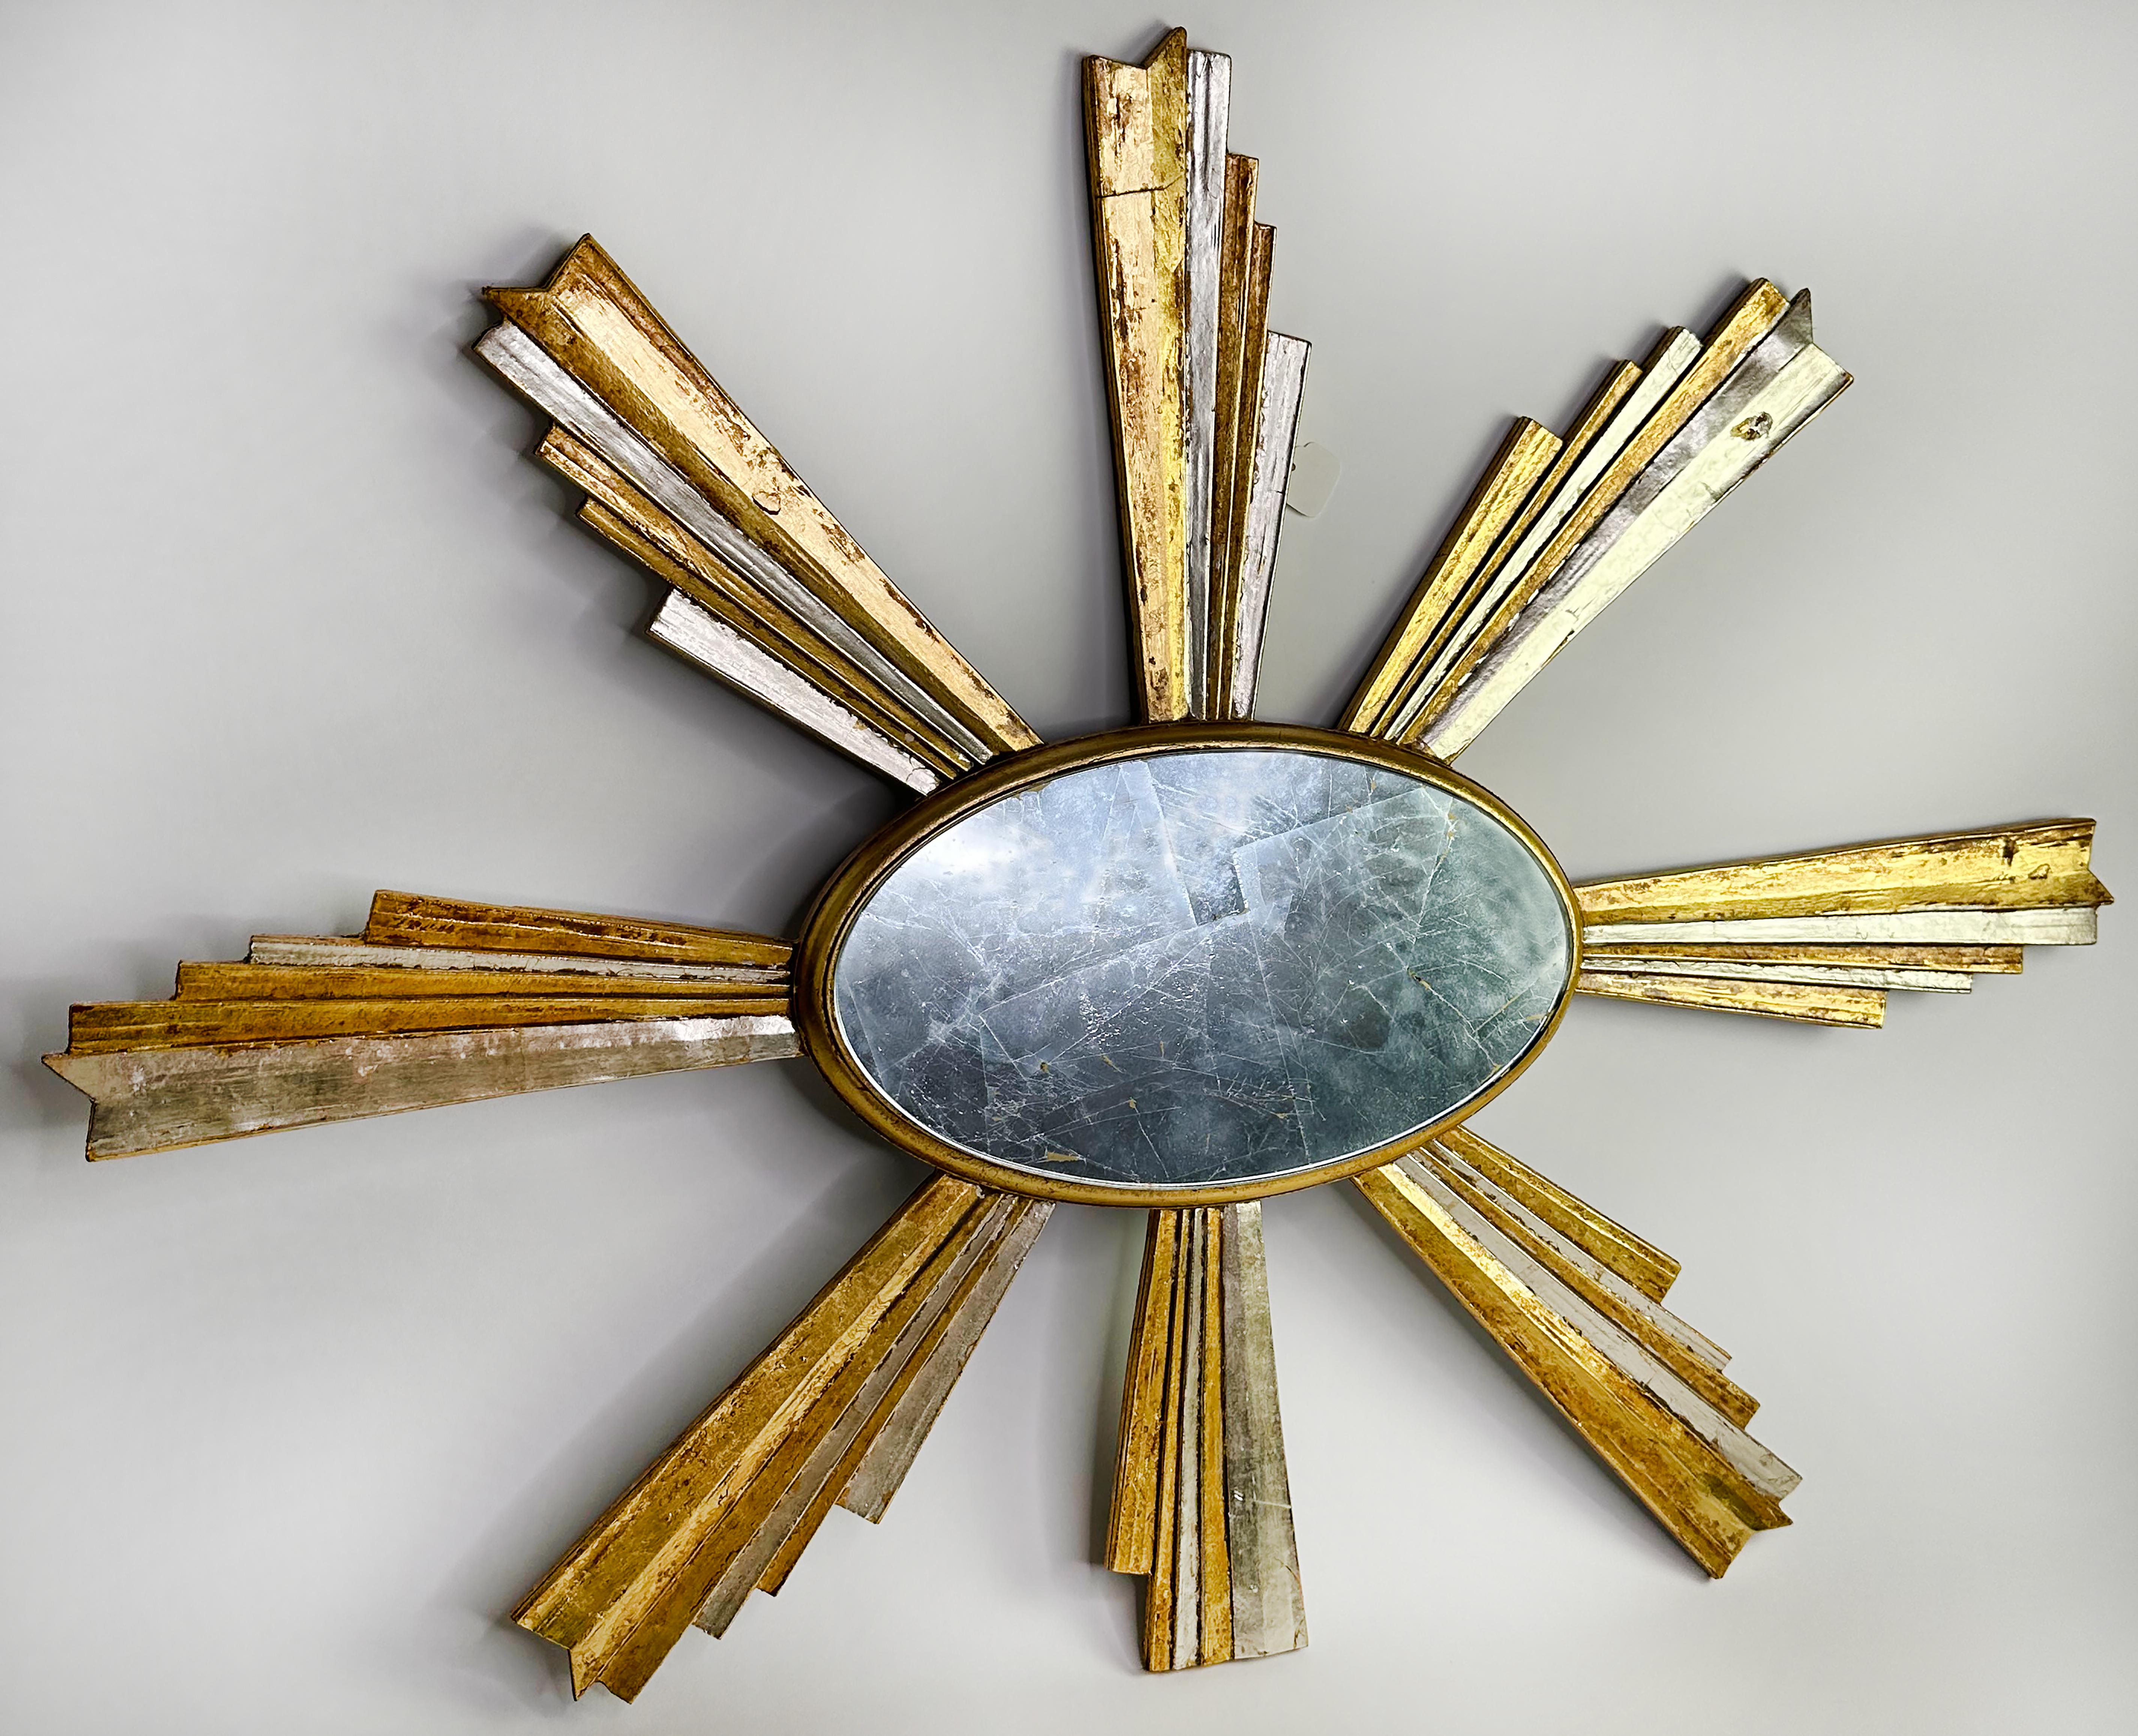 An elegant giltwood sunburst shaped oval framed wall mirror. Made some time between the late 1990s and the early 2000s. Created in an Art Deco style.

In good condition. Some gentle wear consistent with age and use. This bold and unique